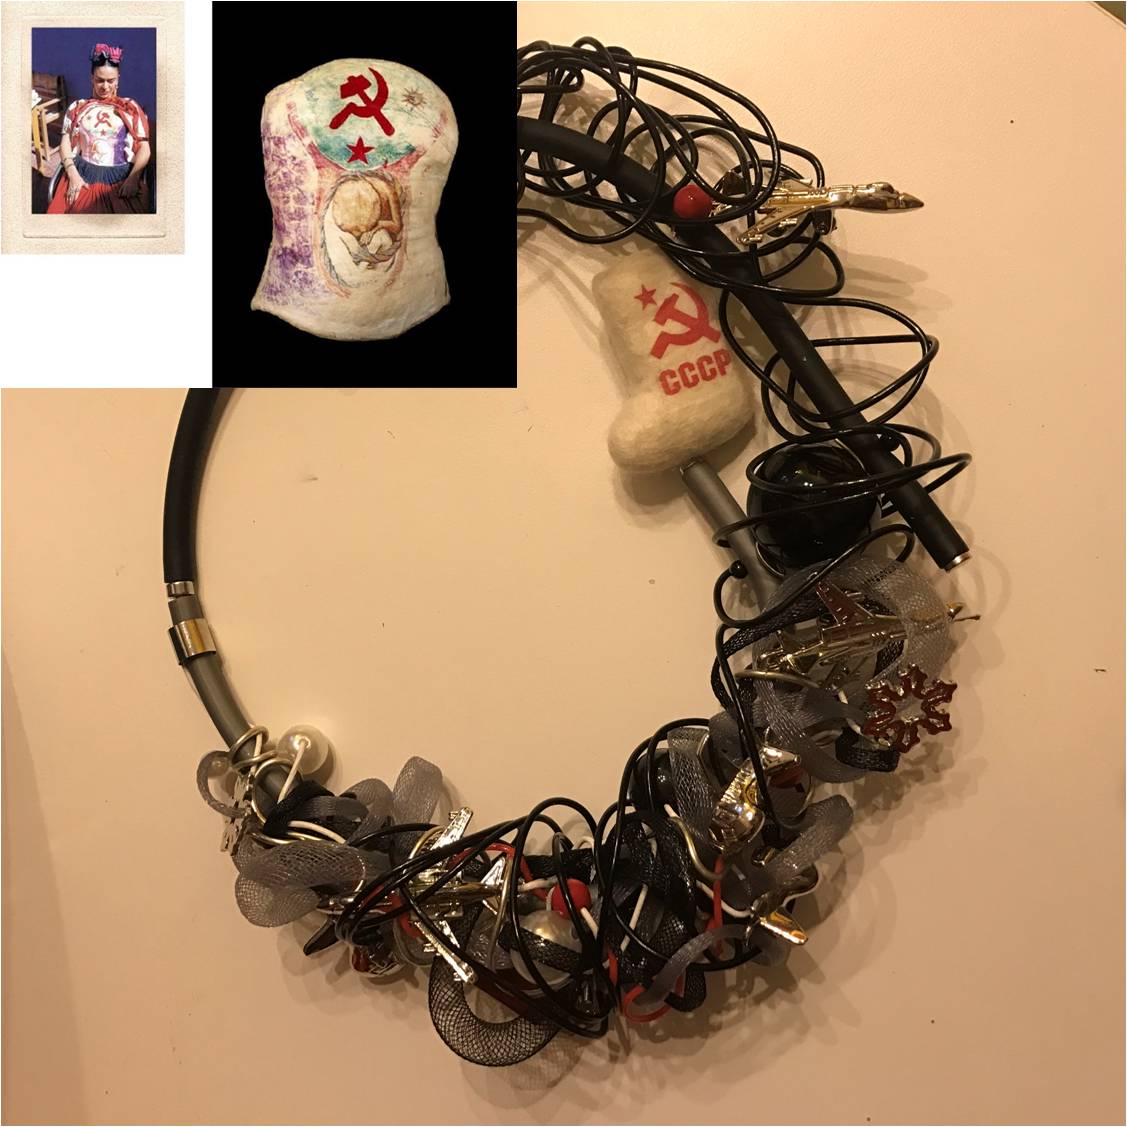 Necklace Twentieth Century Frida, with the decor of the sickle and hammer from Frida's corset